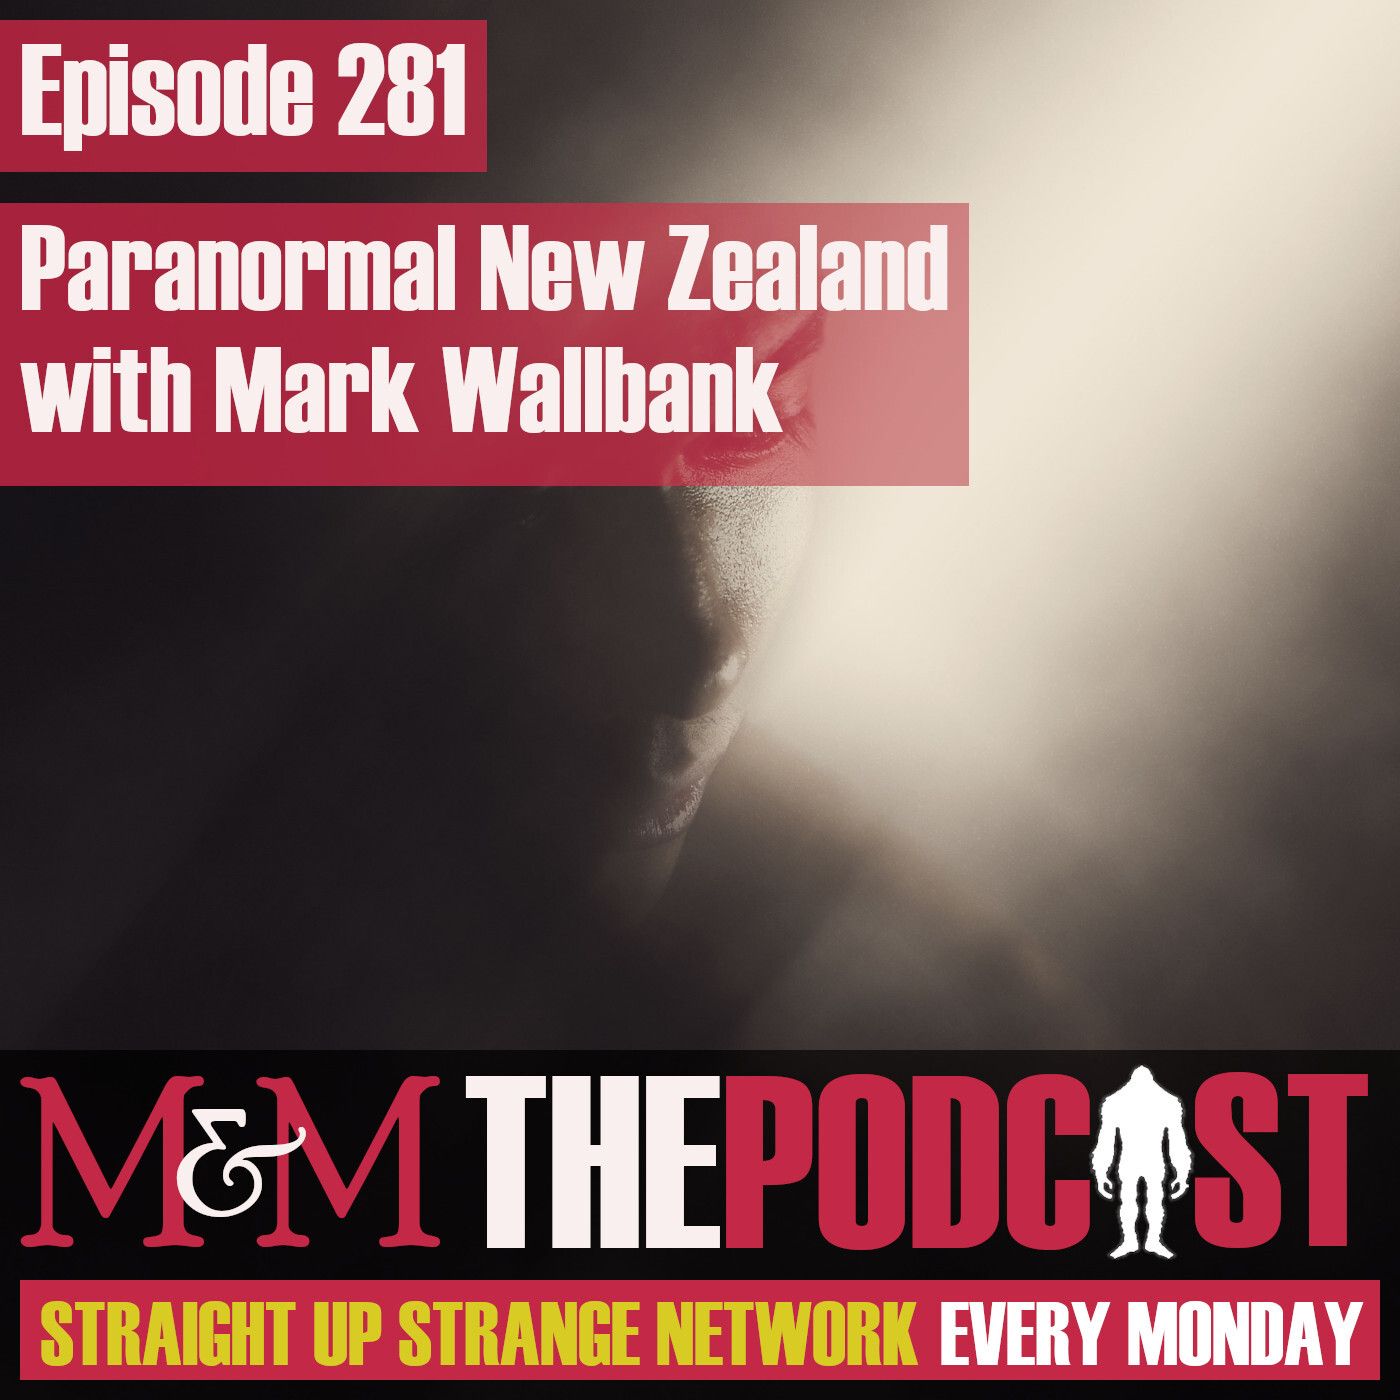 Mysteries and Monsters: Episode 281 Paranormal New Zealand with Mark Wallbank